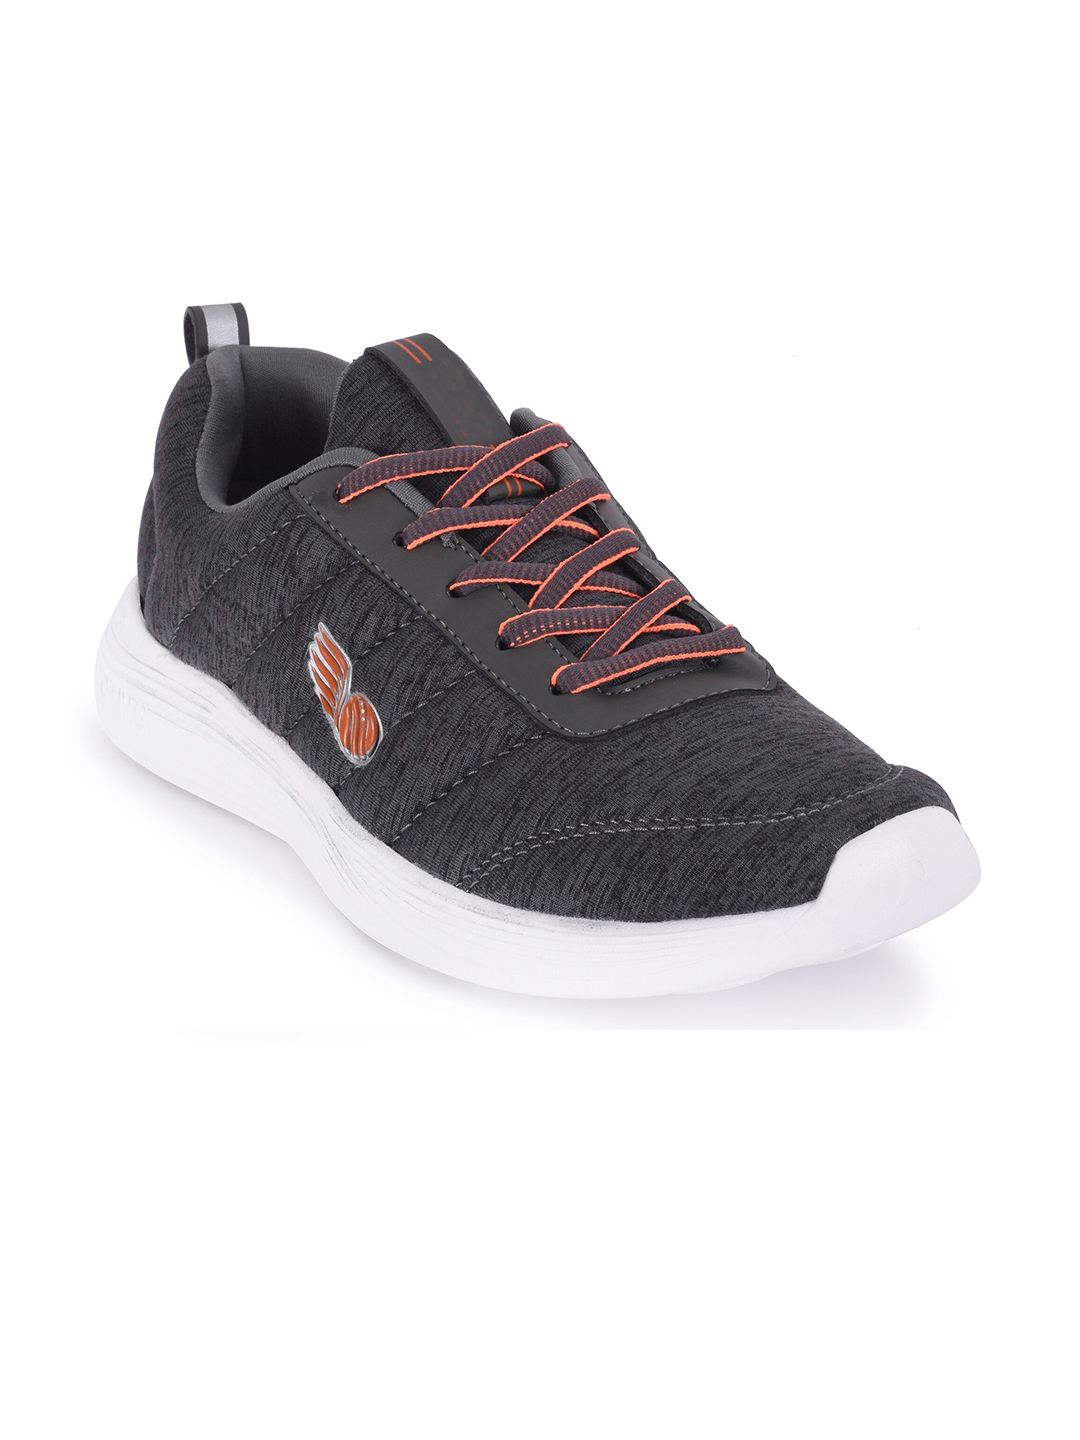 Action Women Grey Mesh Running Shoes Price in India